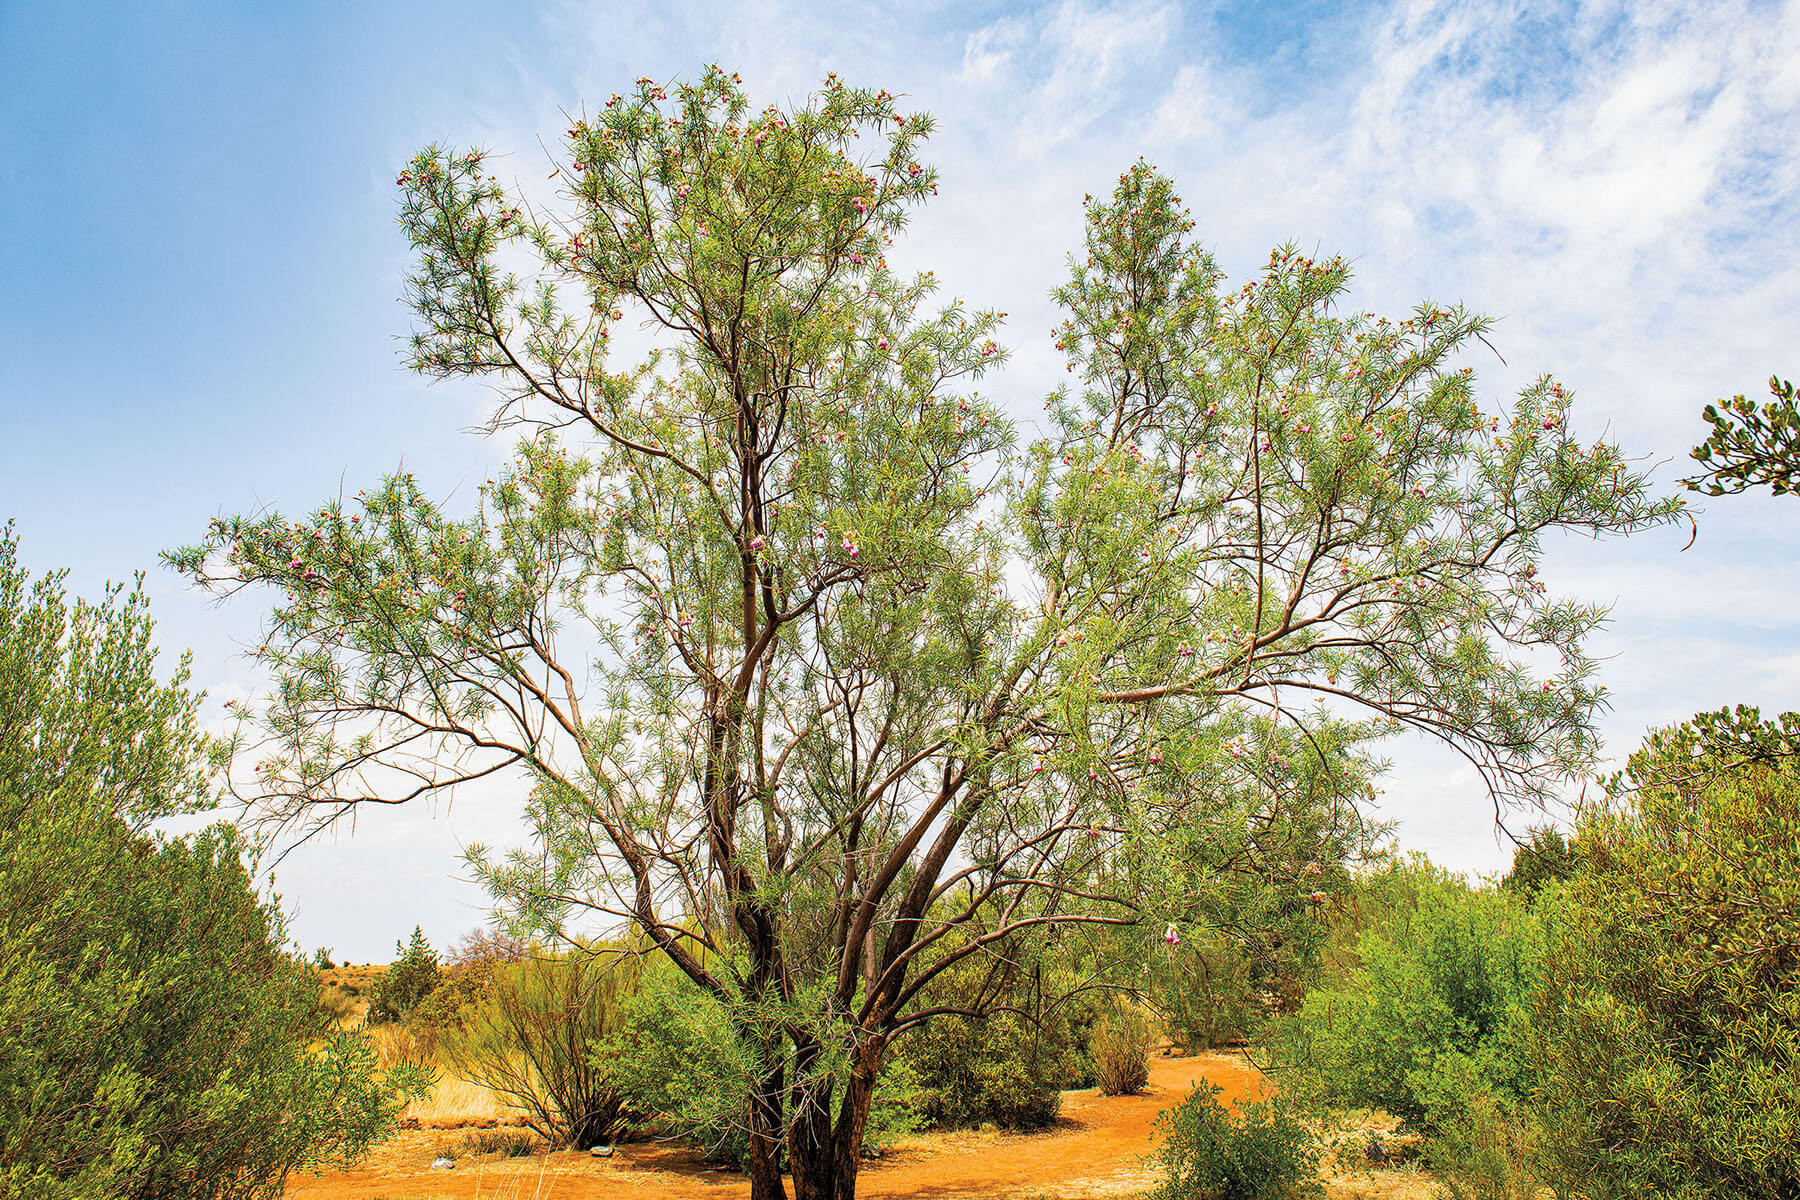 A tall tree with green leaves in front of a bright light blue sky and desert ground